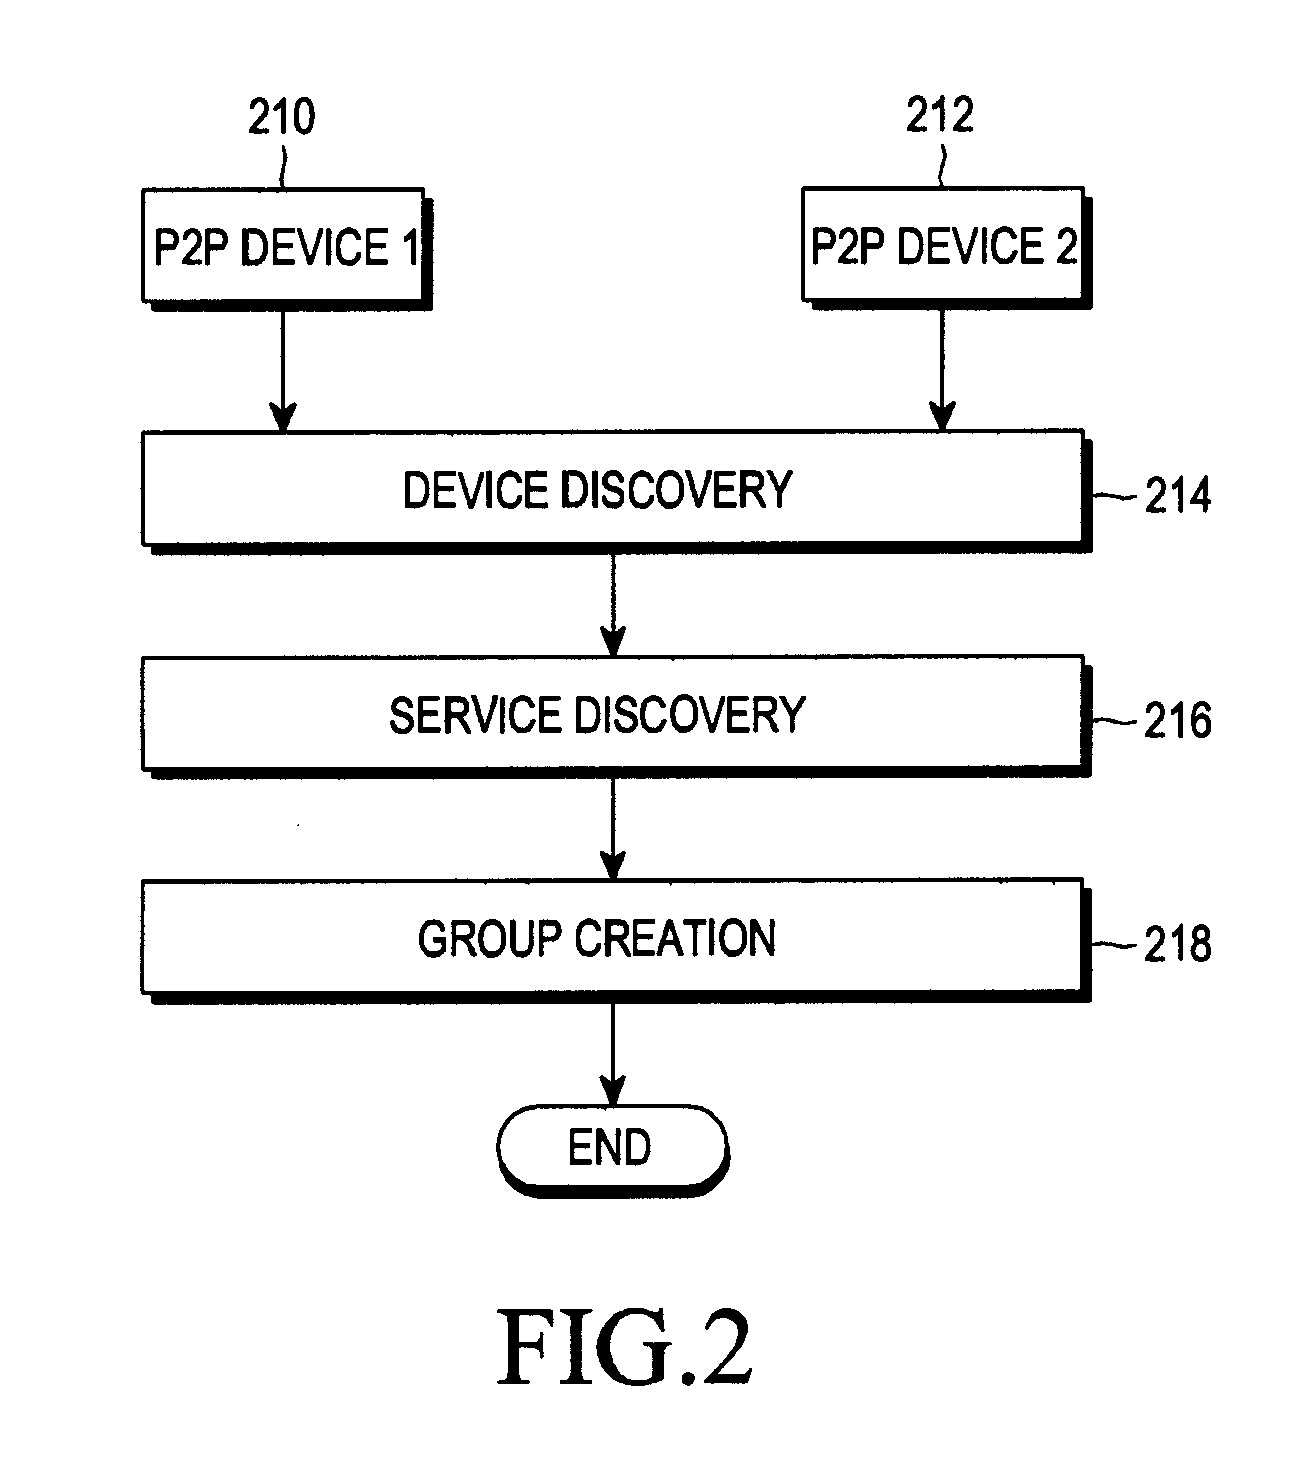 Method and apparatus for forming Wi-Fi P2P group using Wi-Fi direct